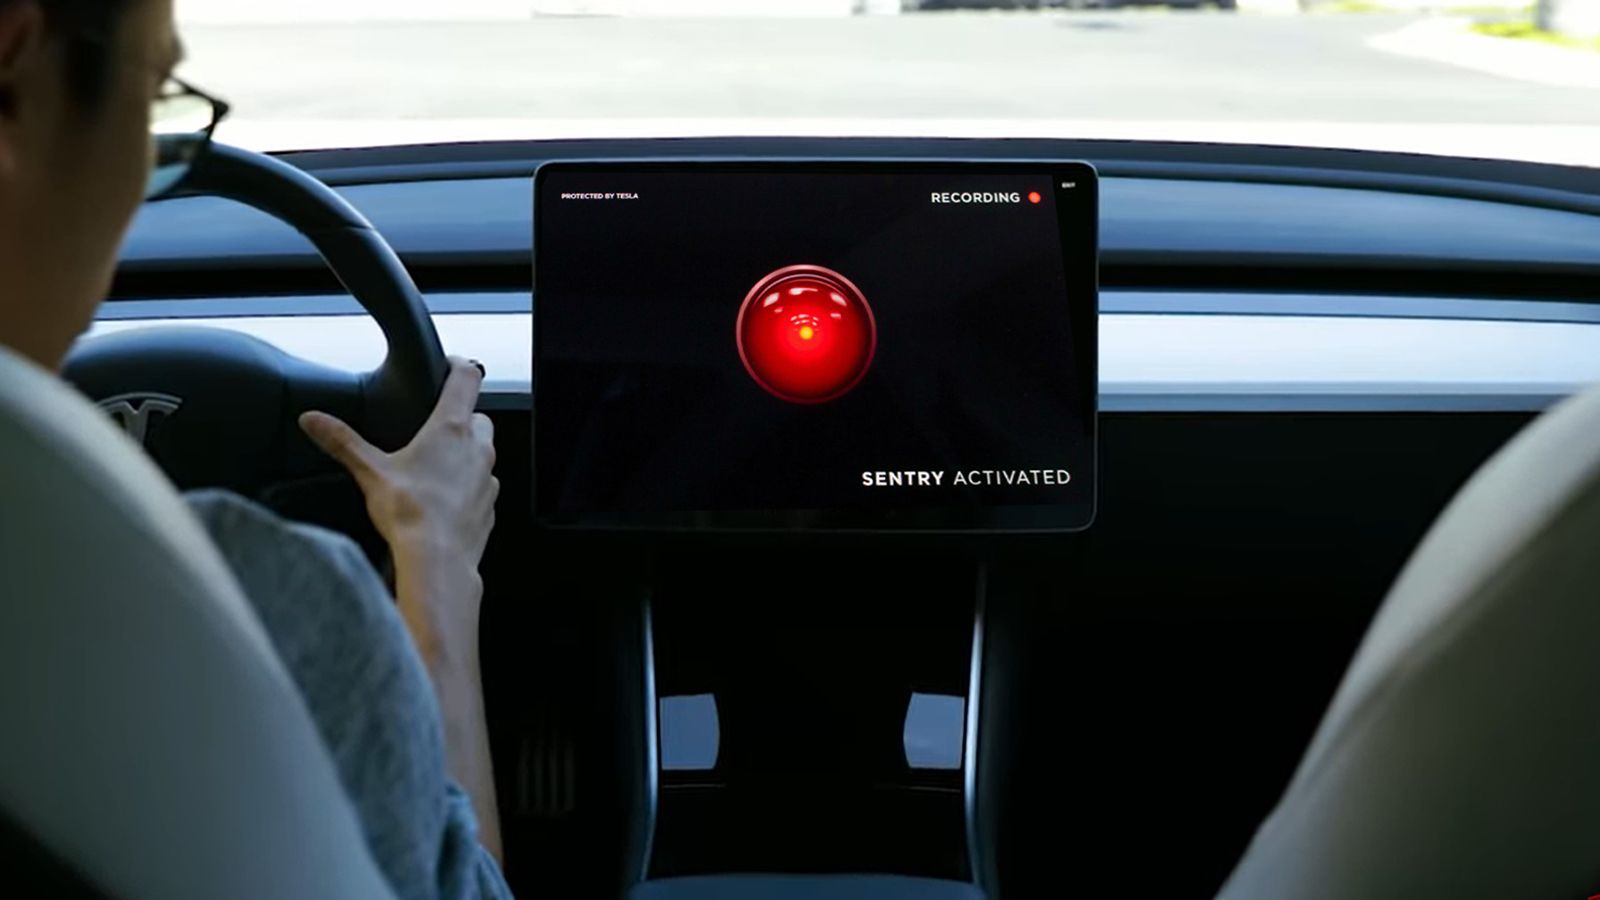 How To Watch Tesla Sentry Video